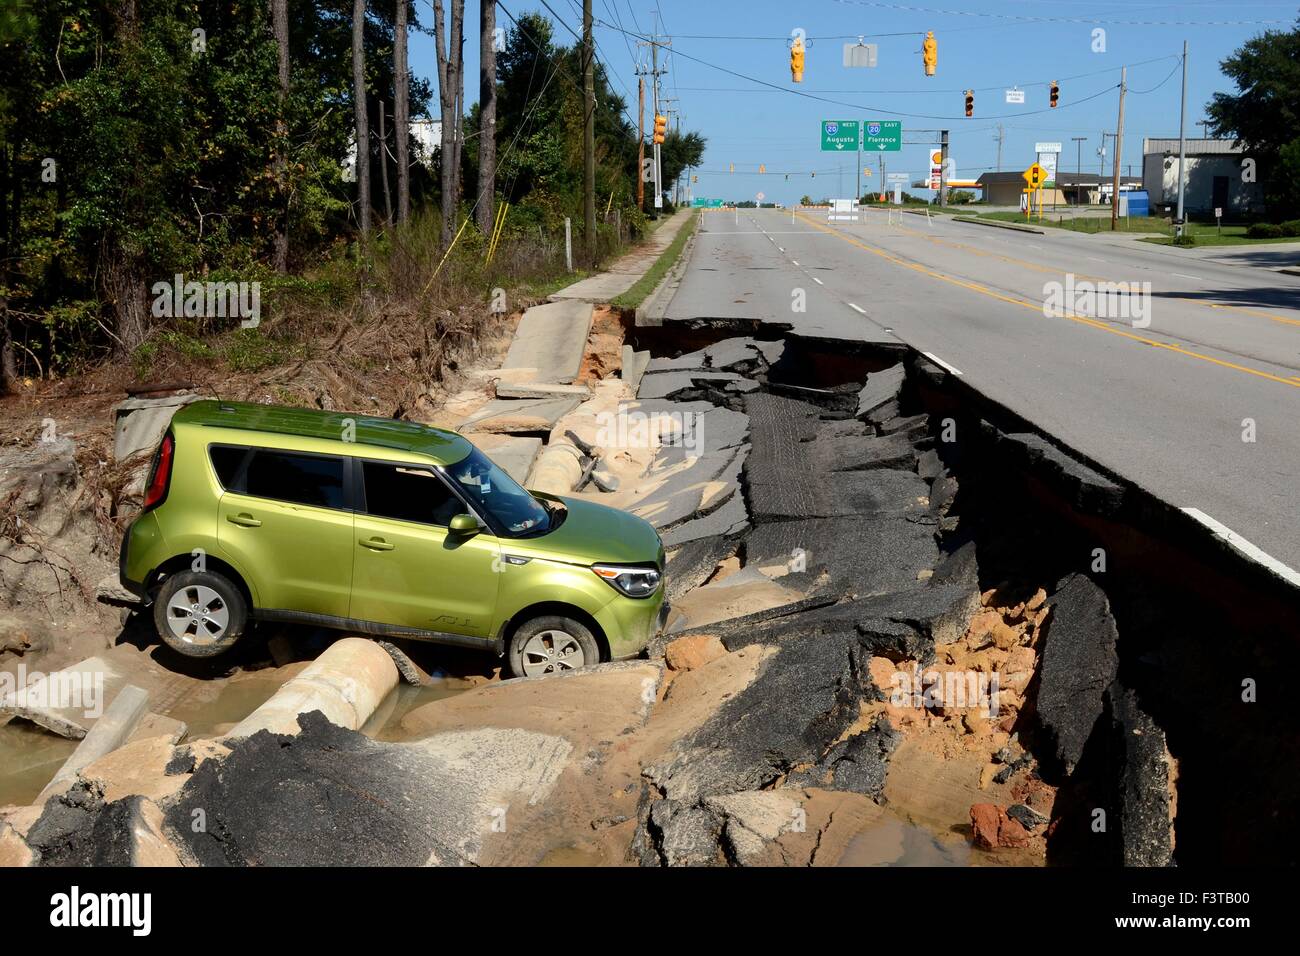 A vehicle sits in debris after the road collapsed in the state capital following record setting rains October 11, 2015 in Columbia, South Carolina. Large parts of South Carolina suffered from record setting rains that flooded large portions of the state. Stock Photo